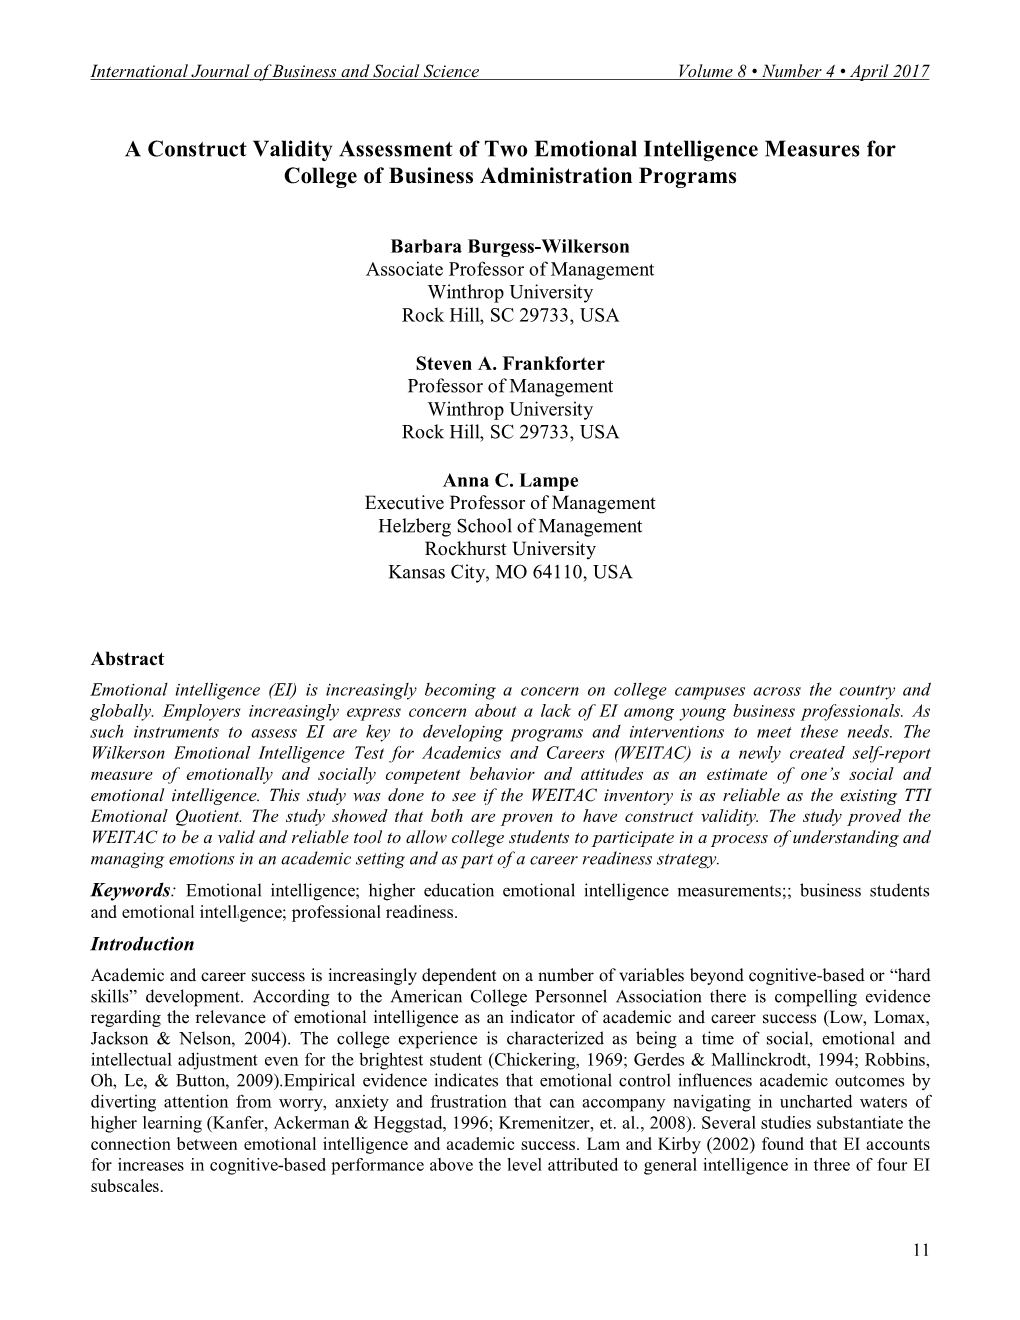 A Construct Validity Assessment of Two Emotional Intelligence Measures for College of Business Administration Programs